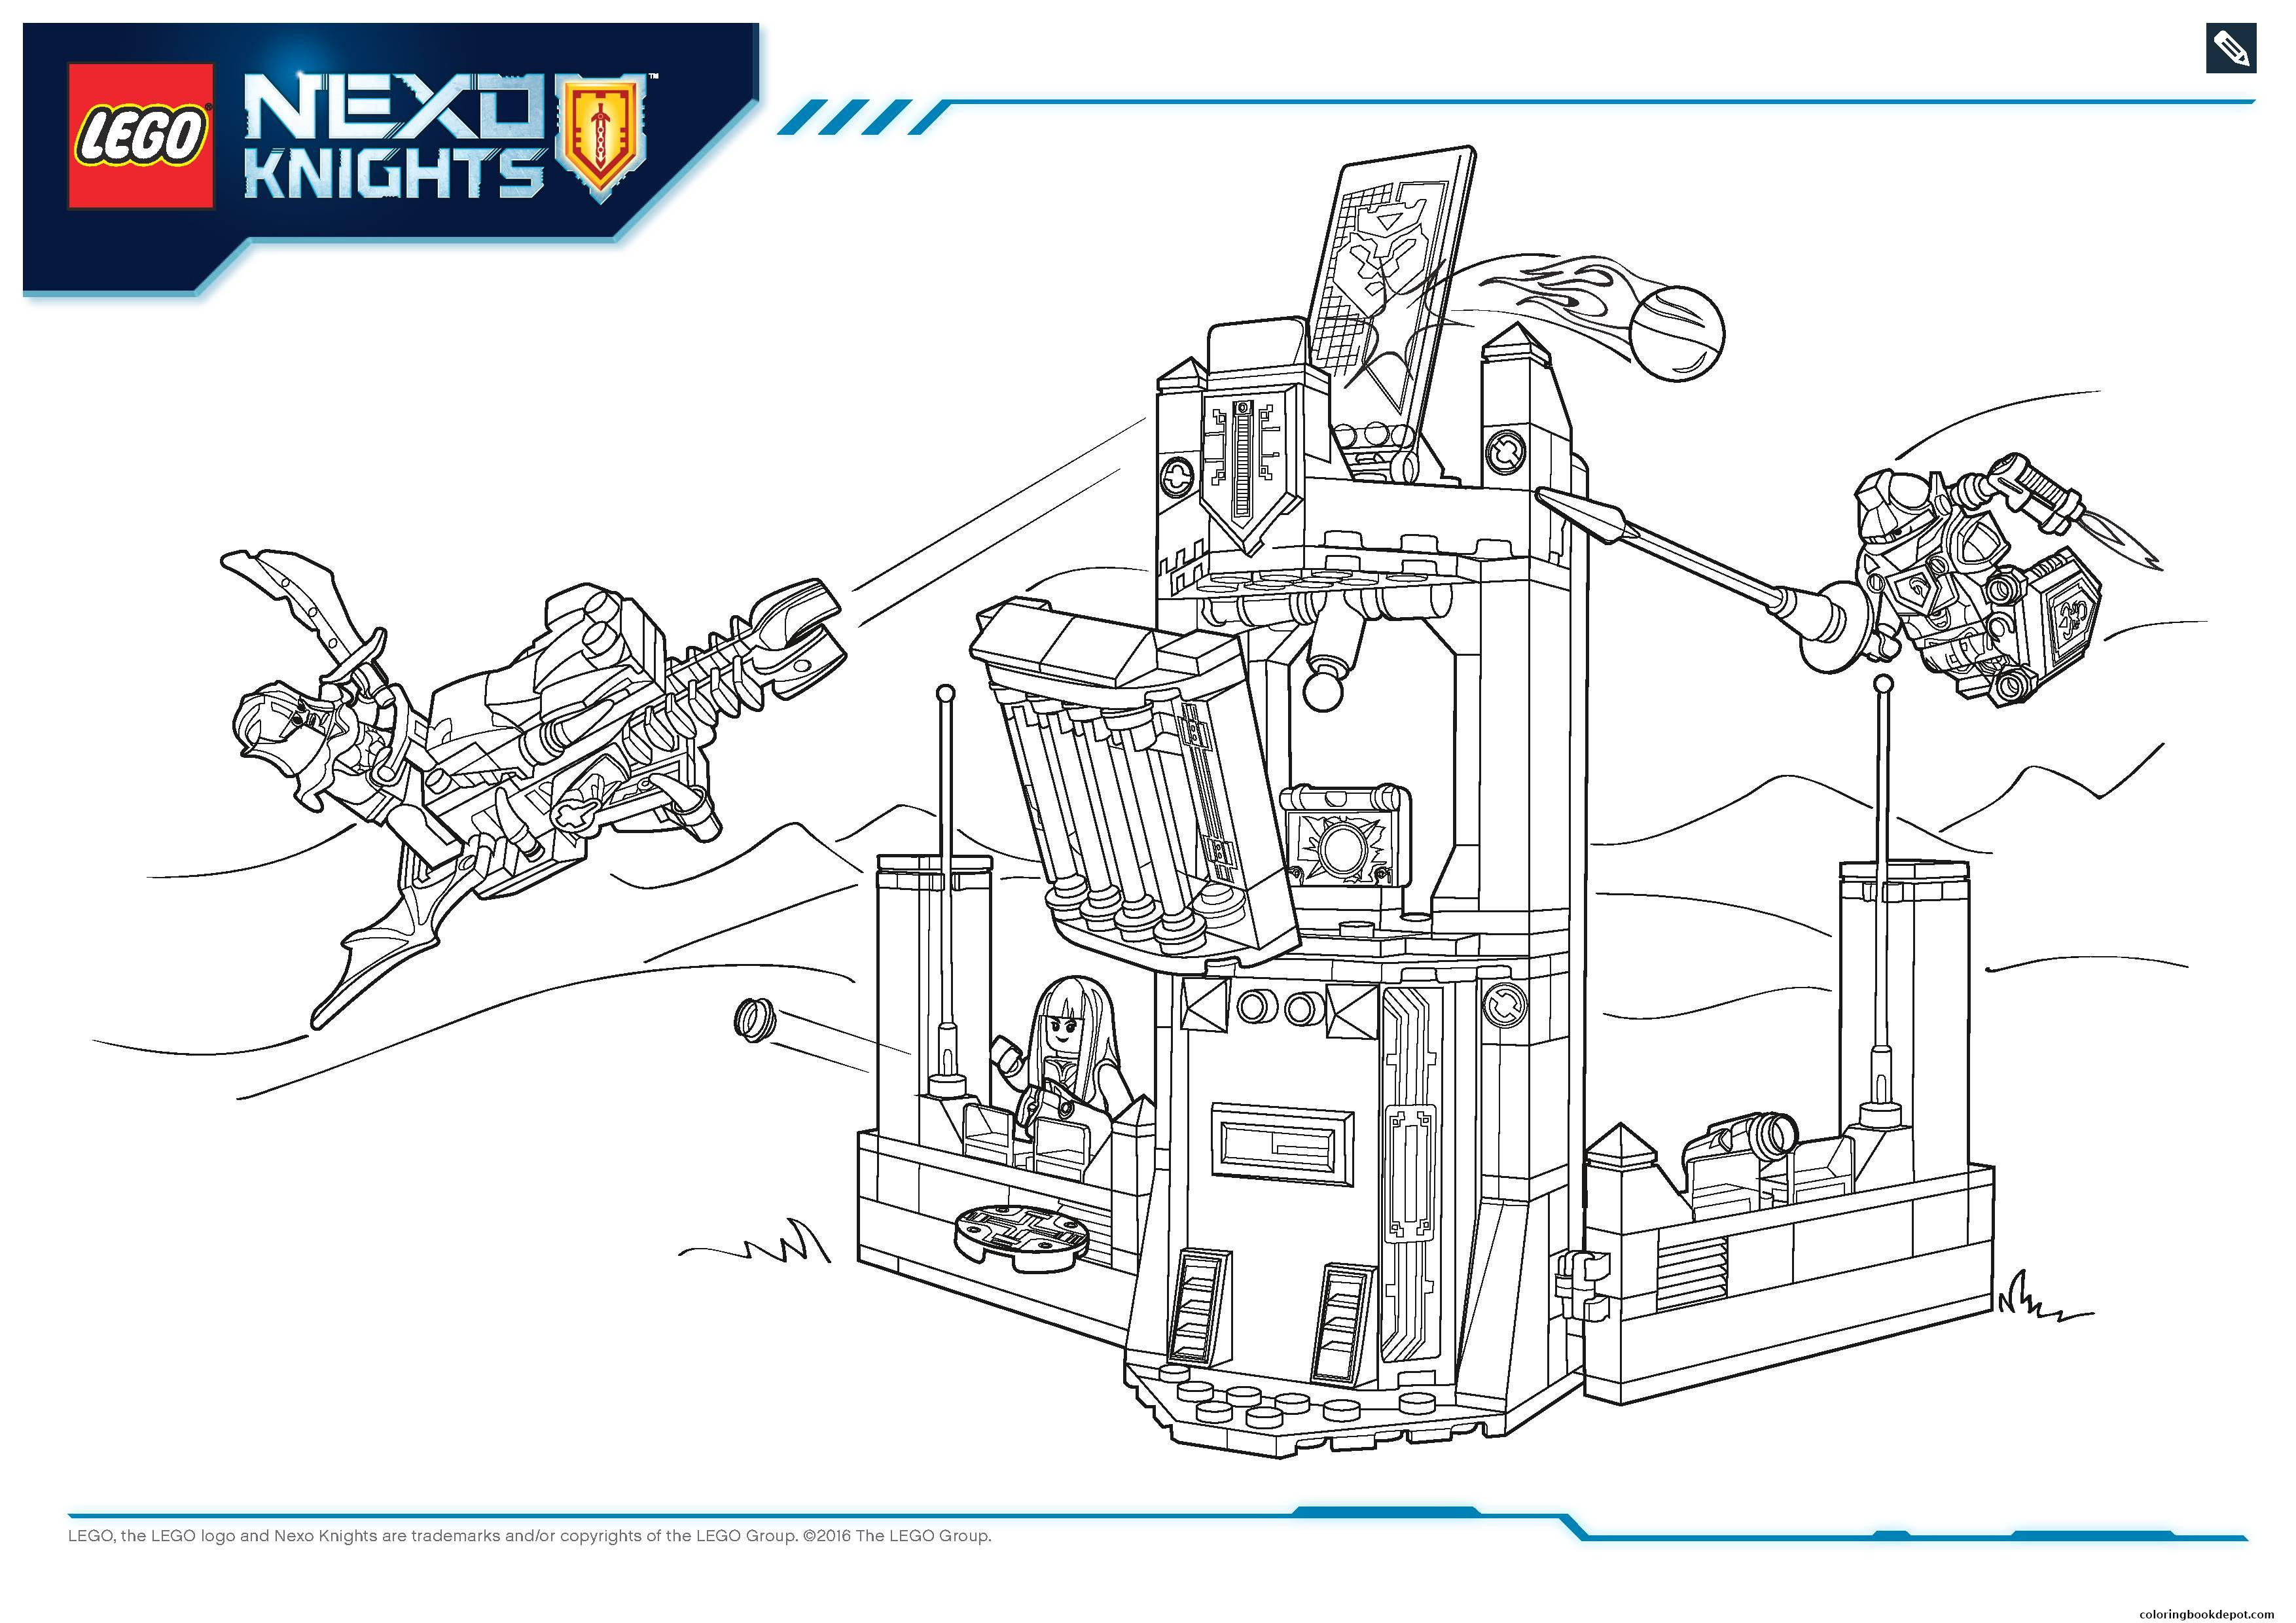 Nexo Knights Coloring Pages 20 Fresh Lego Nexo Knights Coloring Pages Msainfo